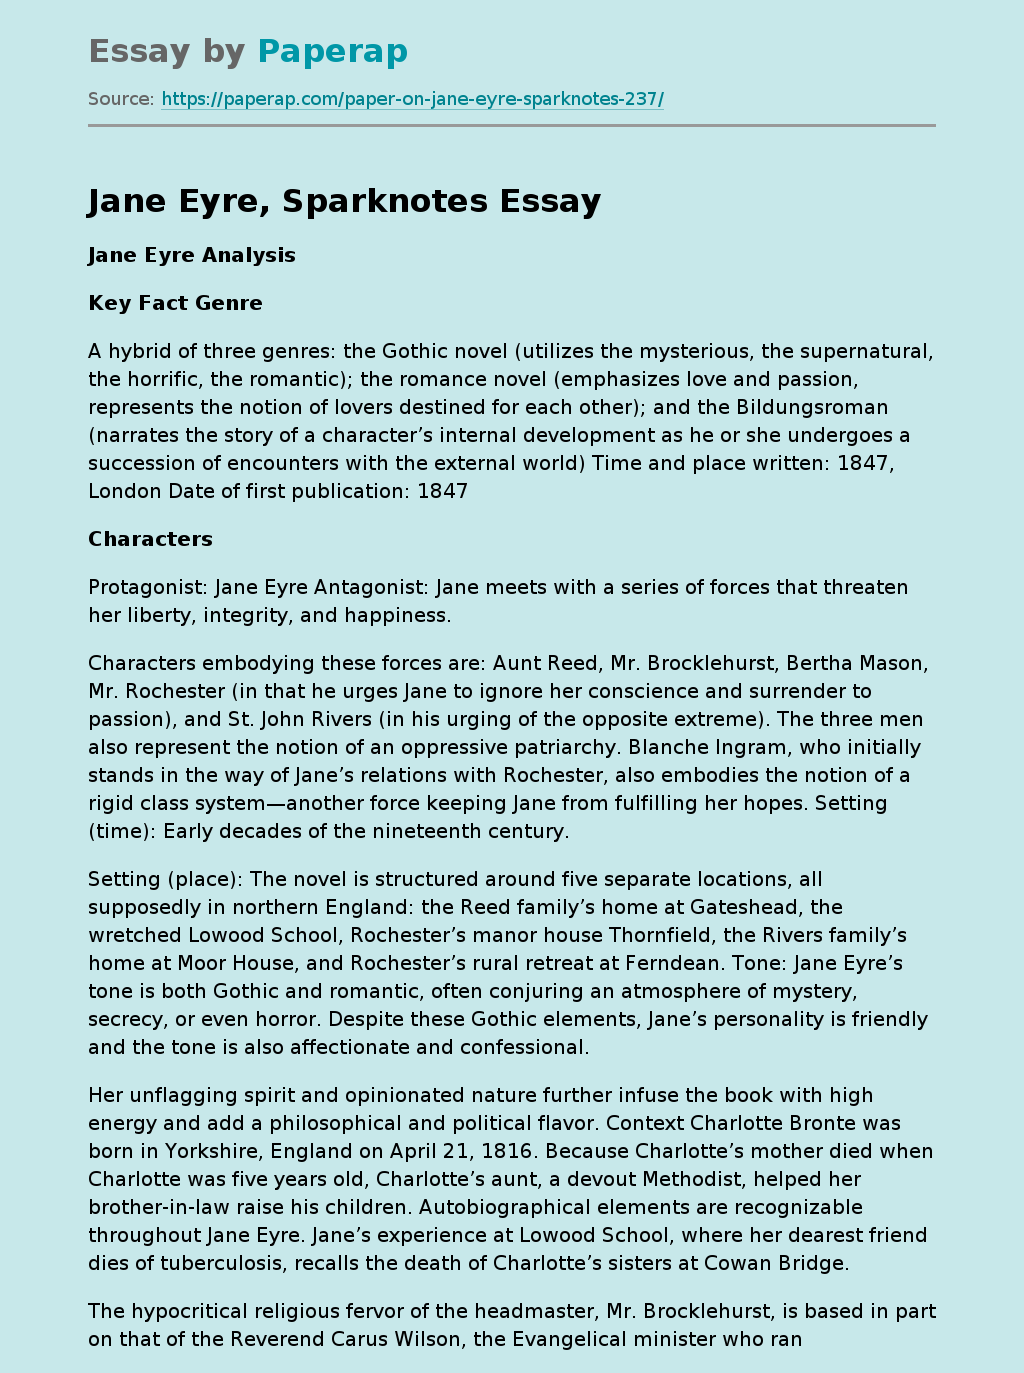 Jane Eyre, Sparknotes